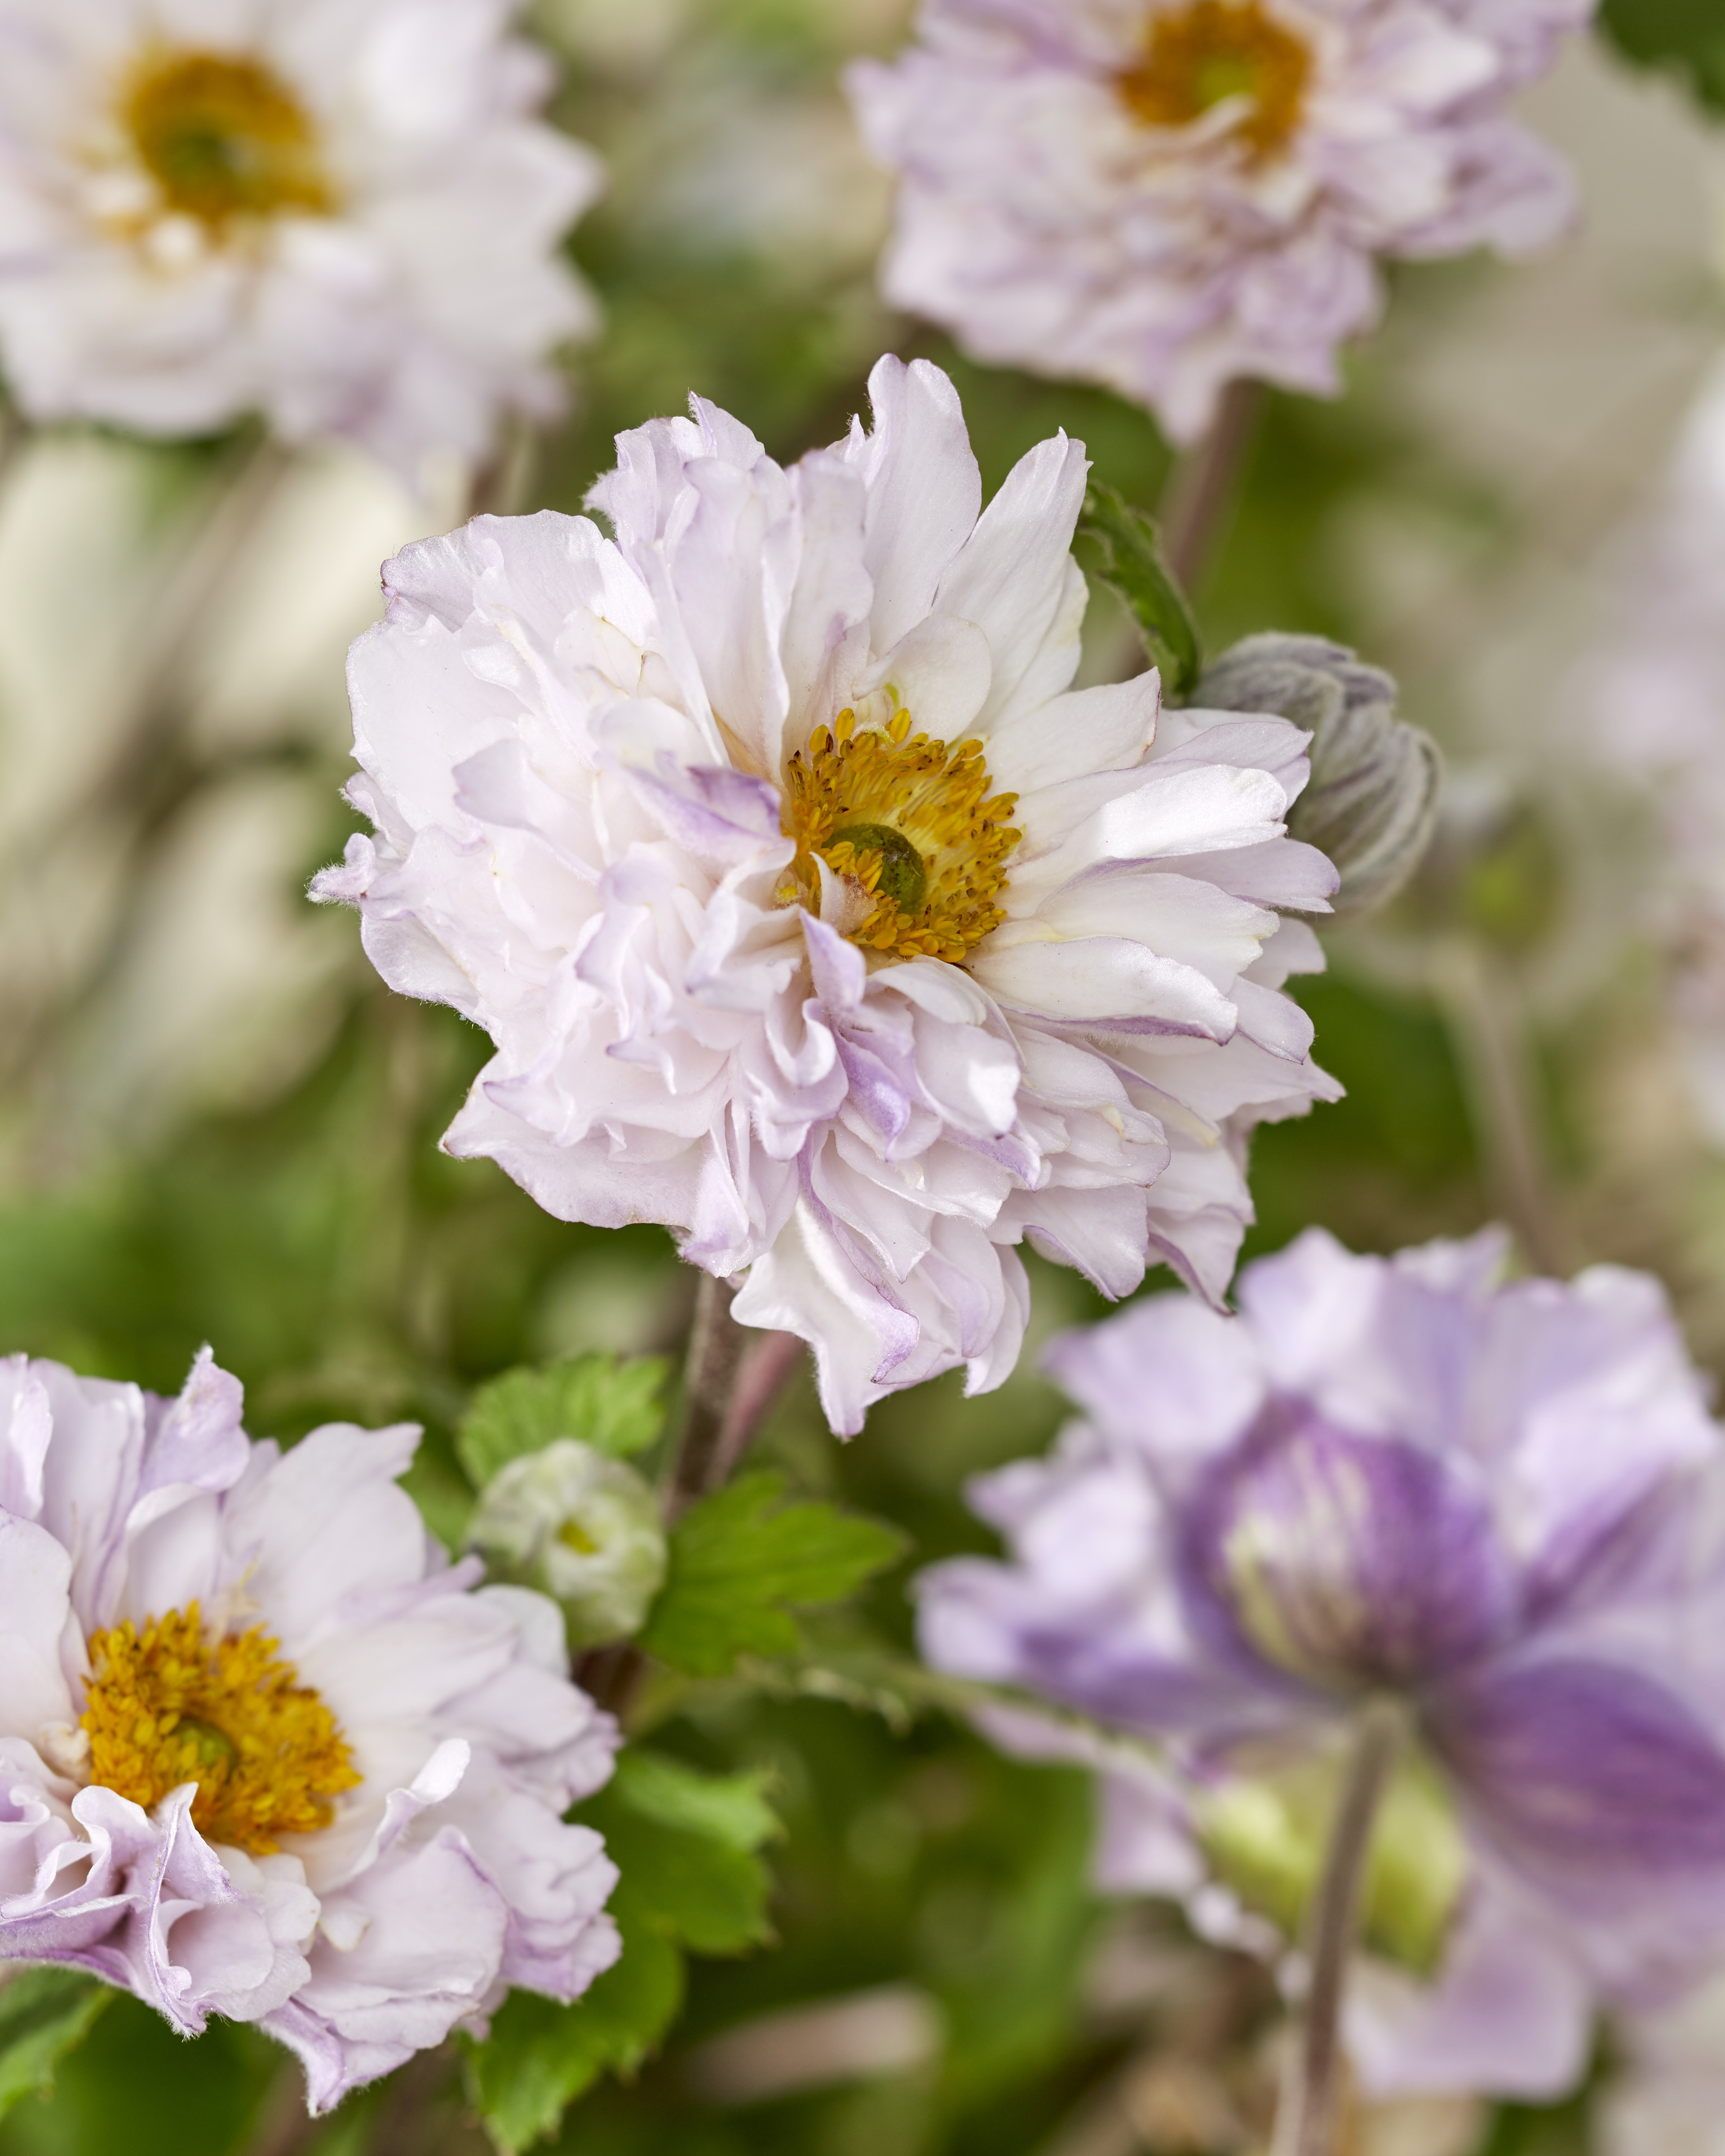 Anemone 'Frilly Knickers', - uploaded by @tombr